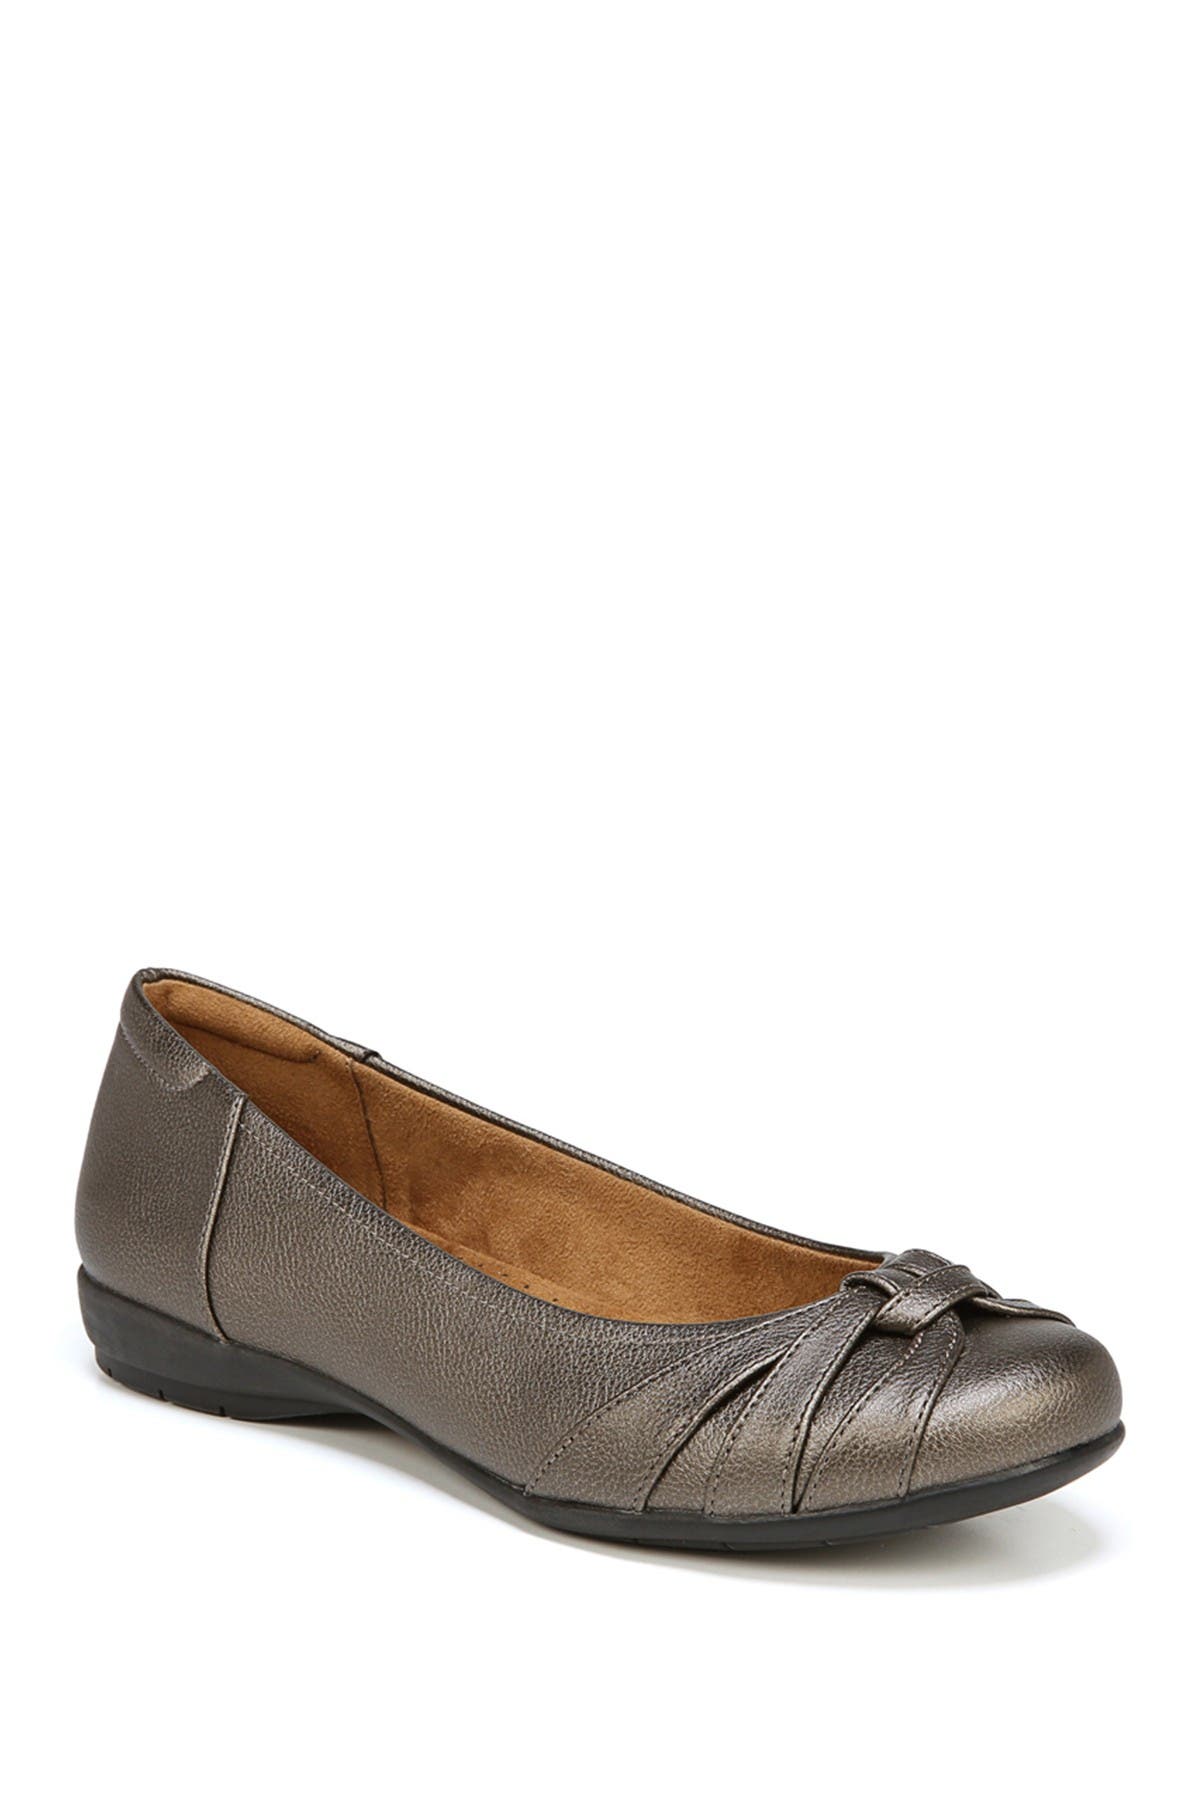 naturalizer shoes wide width